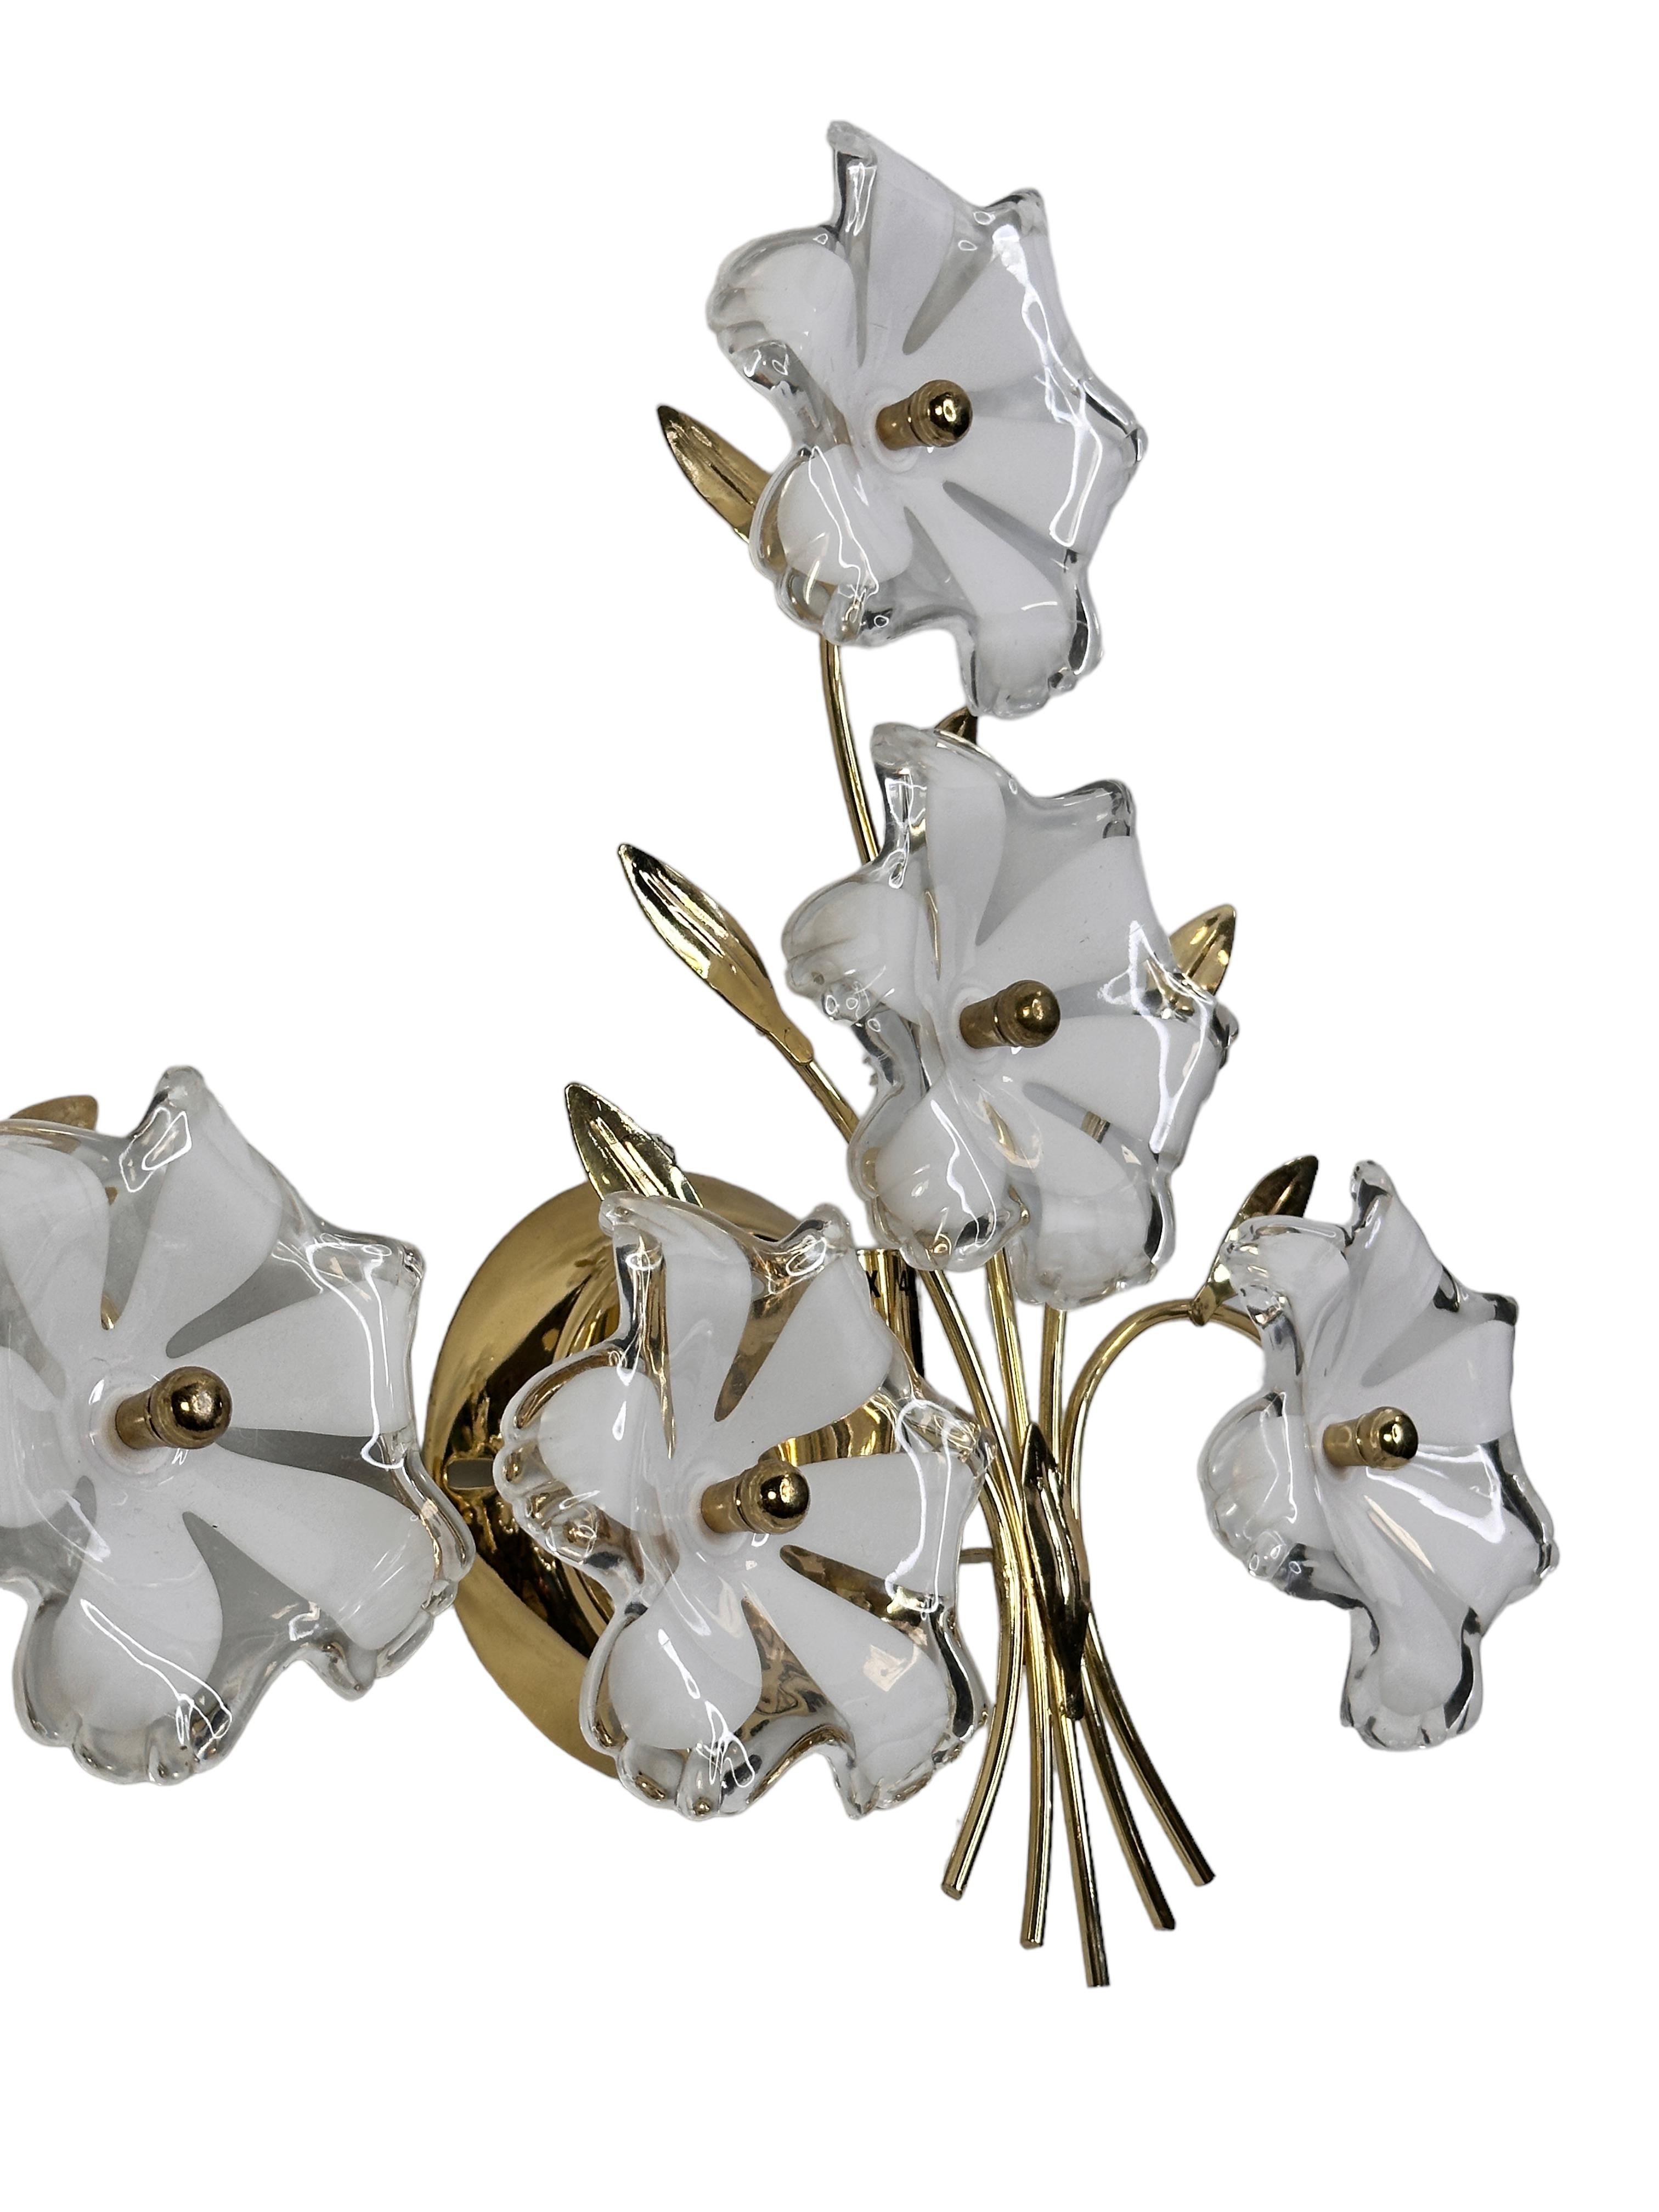 Pair of Floral Murano Sconces, Vintage Brass Wall Lights, 1970s Italy 1